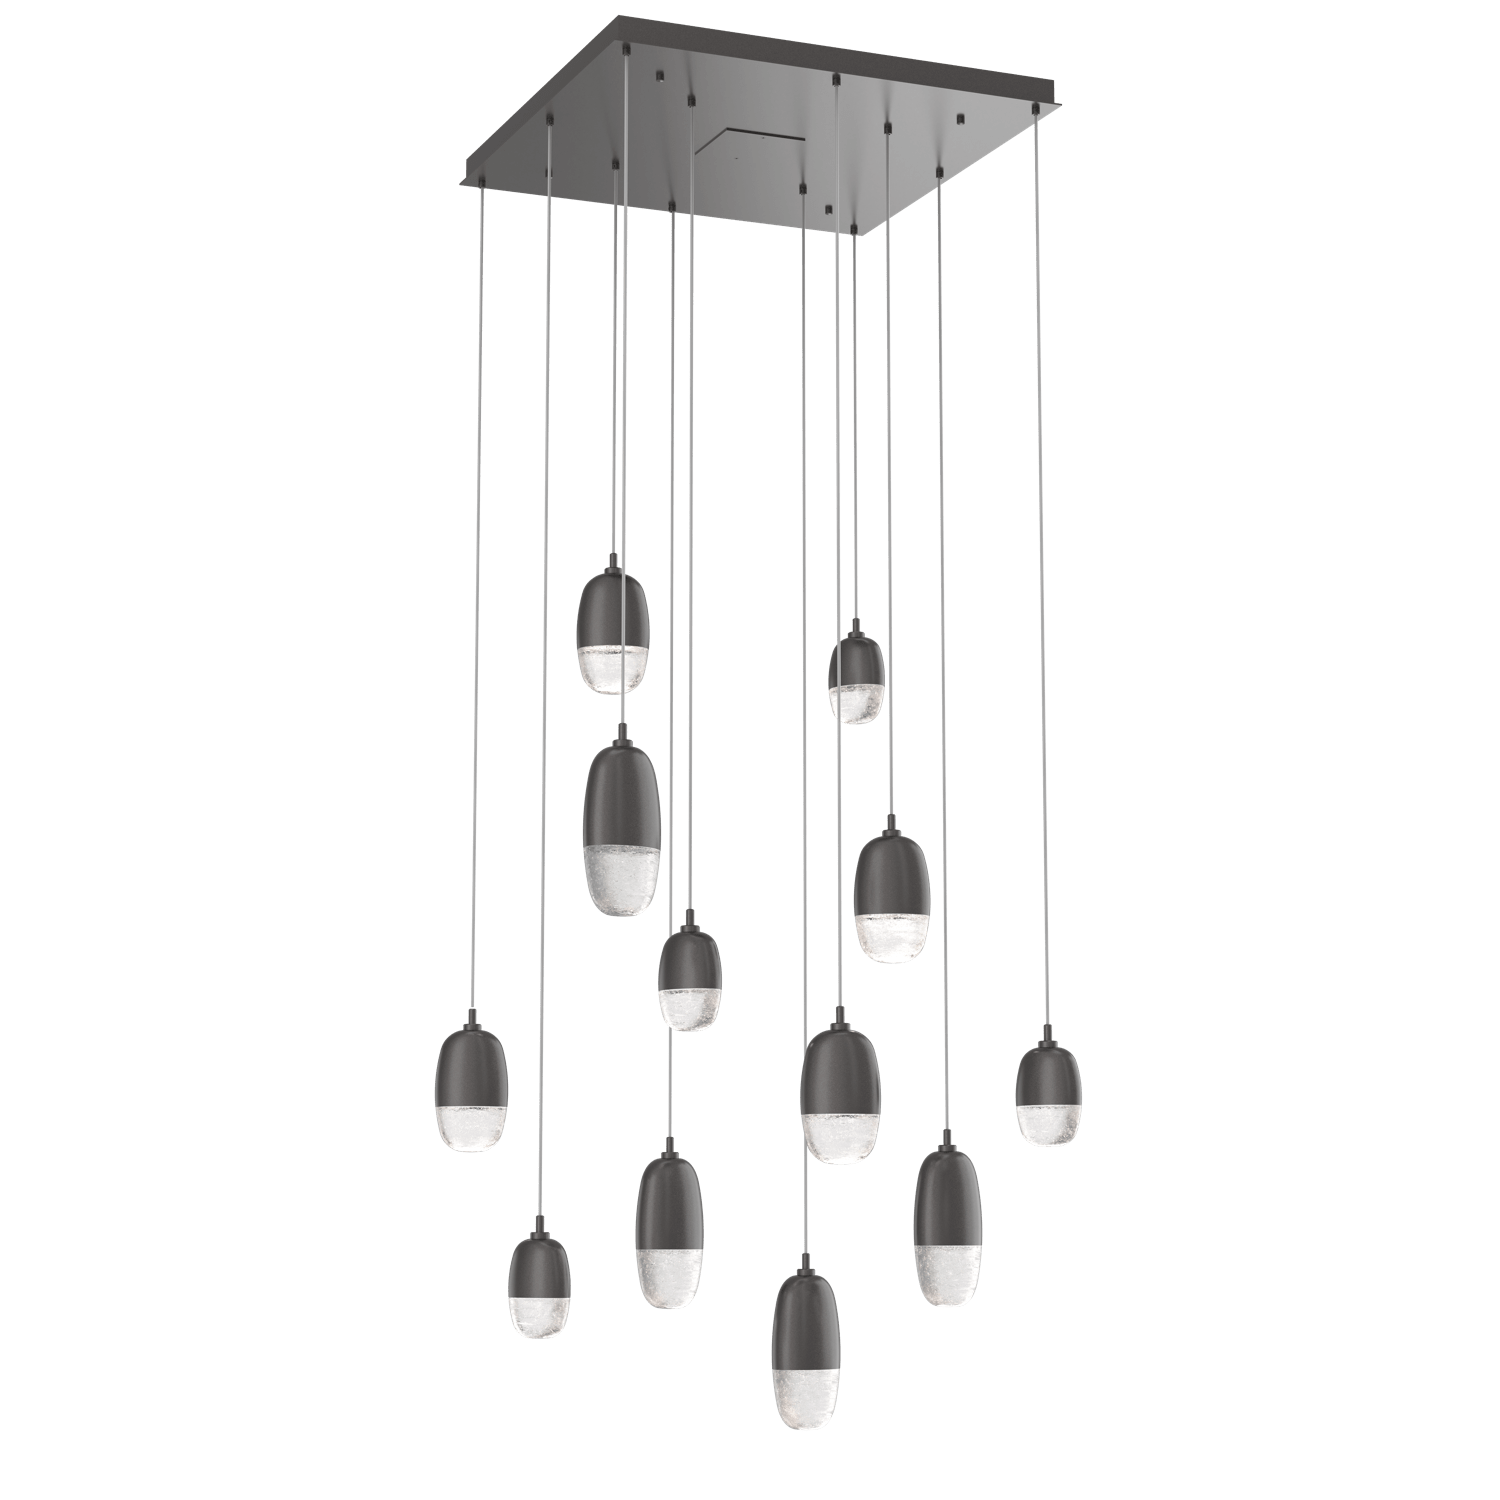 CHB0079-12-GP-Hammerton-Studio-Pebble-12-light-square-pendant-chandelier-with-graphite-finish-and-clear-cast-glass-shades-and-LED-lamping